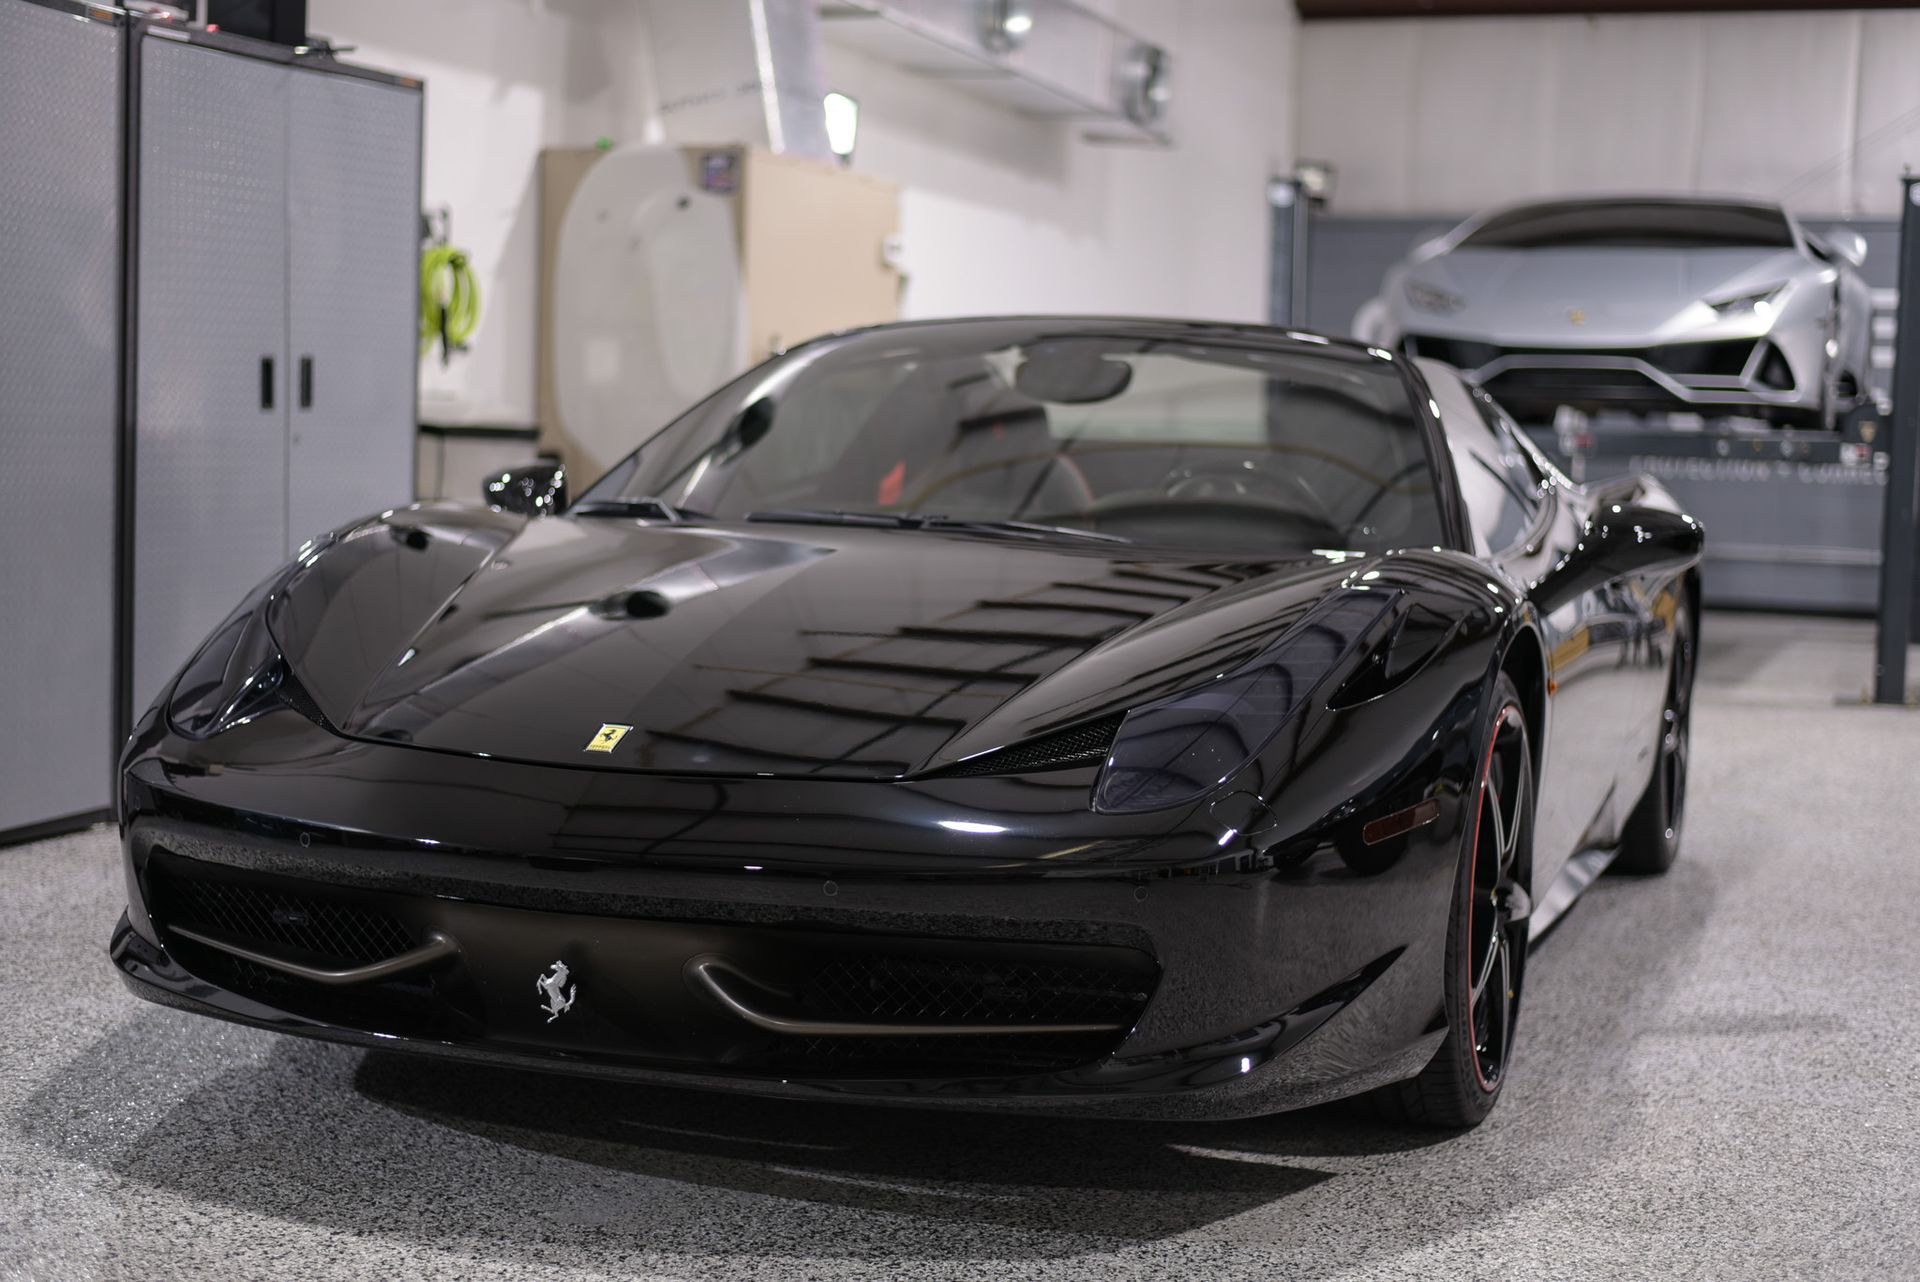 2014 Ferrari 458 Spider Paint Protection Film Removal, Wheels-off Detail  Interior Leather Clean, Paint Correction, PPF Application, Modesta BC-04 and BC-06 Orlando, Florida USA